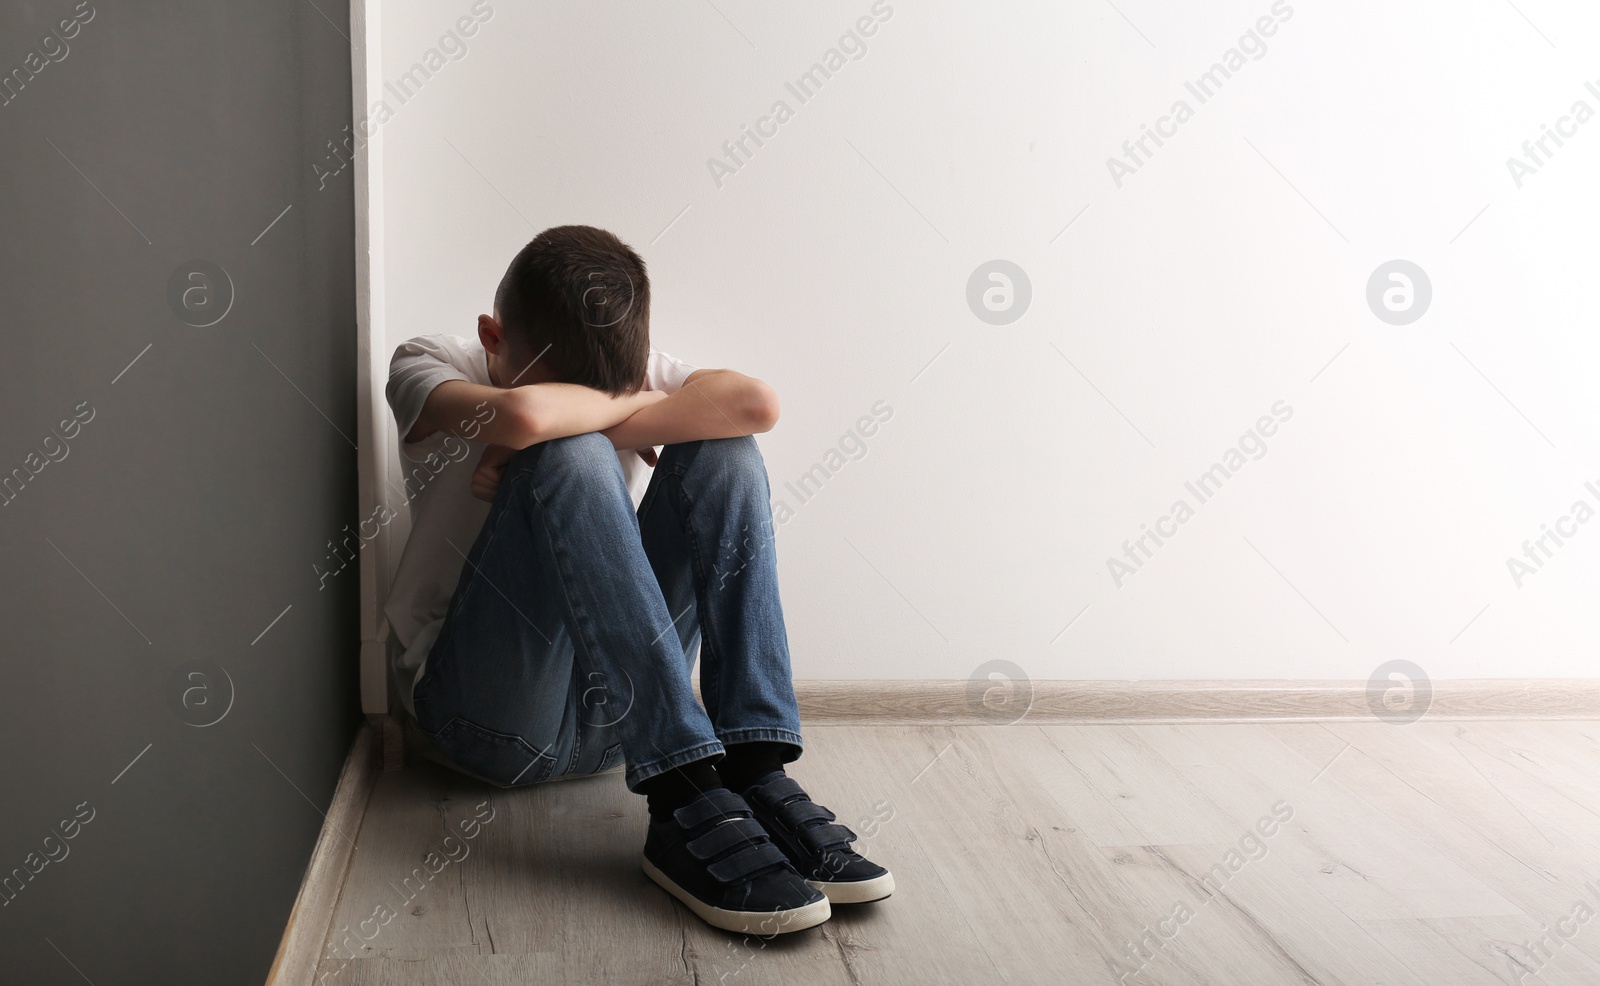 Photo of Upset boy sitting on floor indoors. Space for text